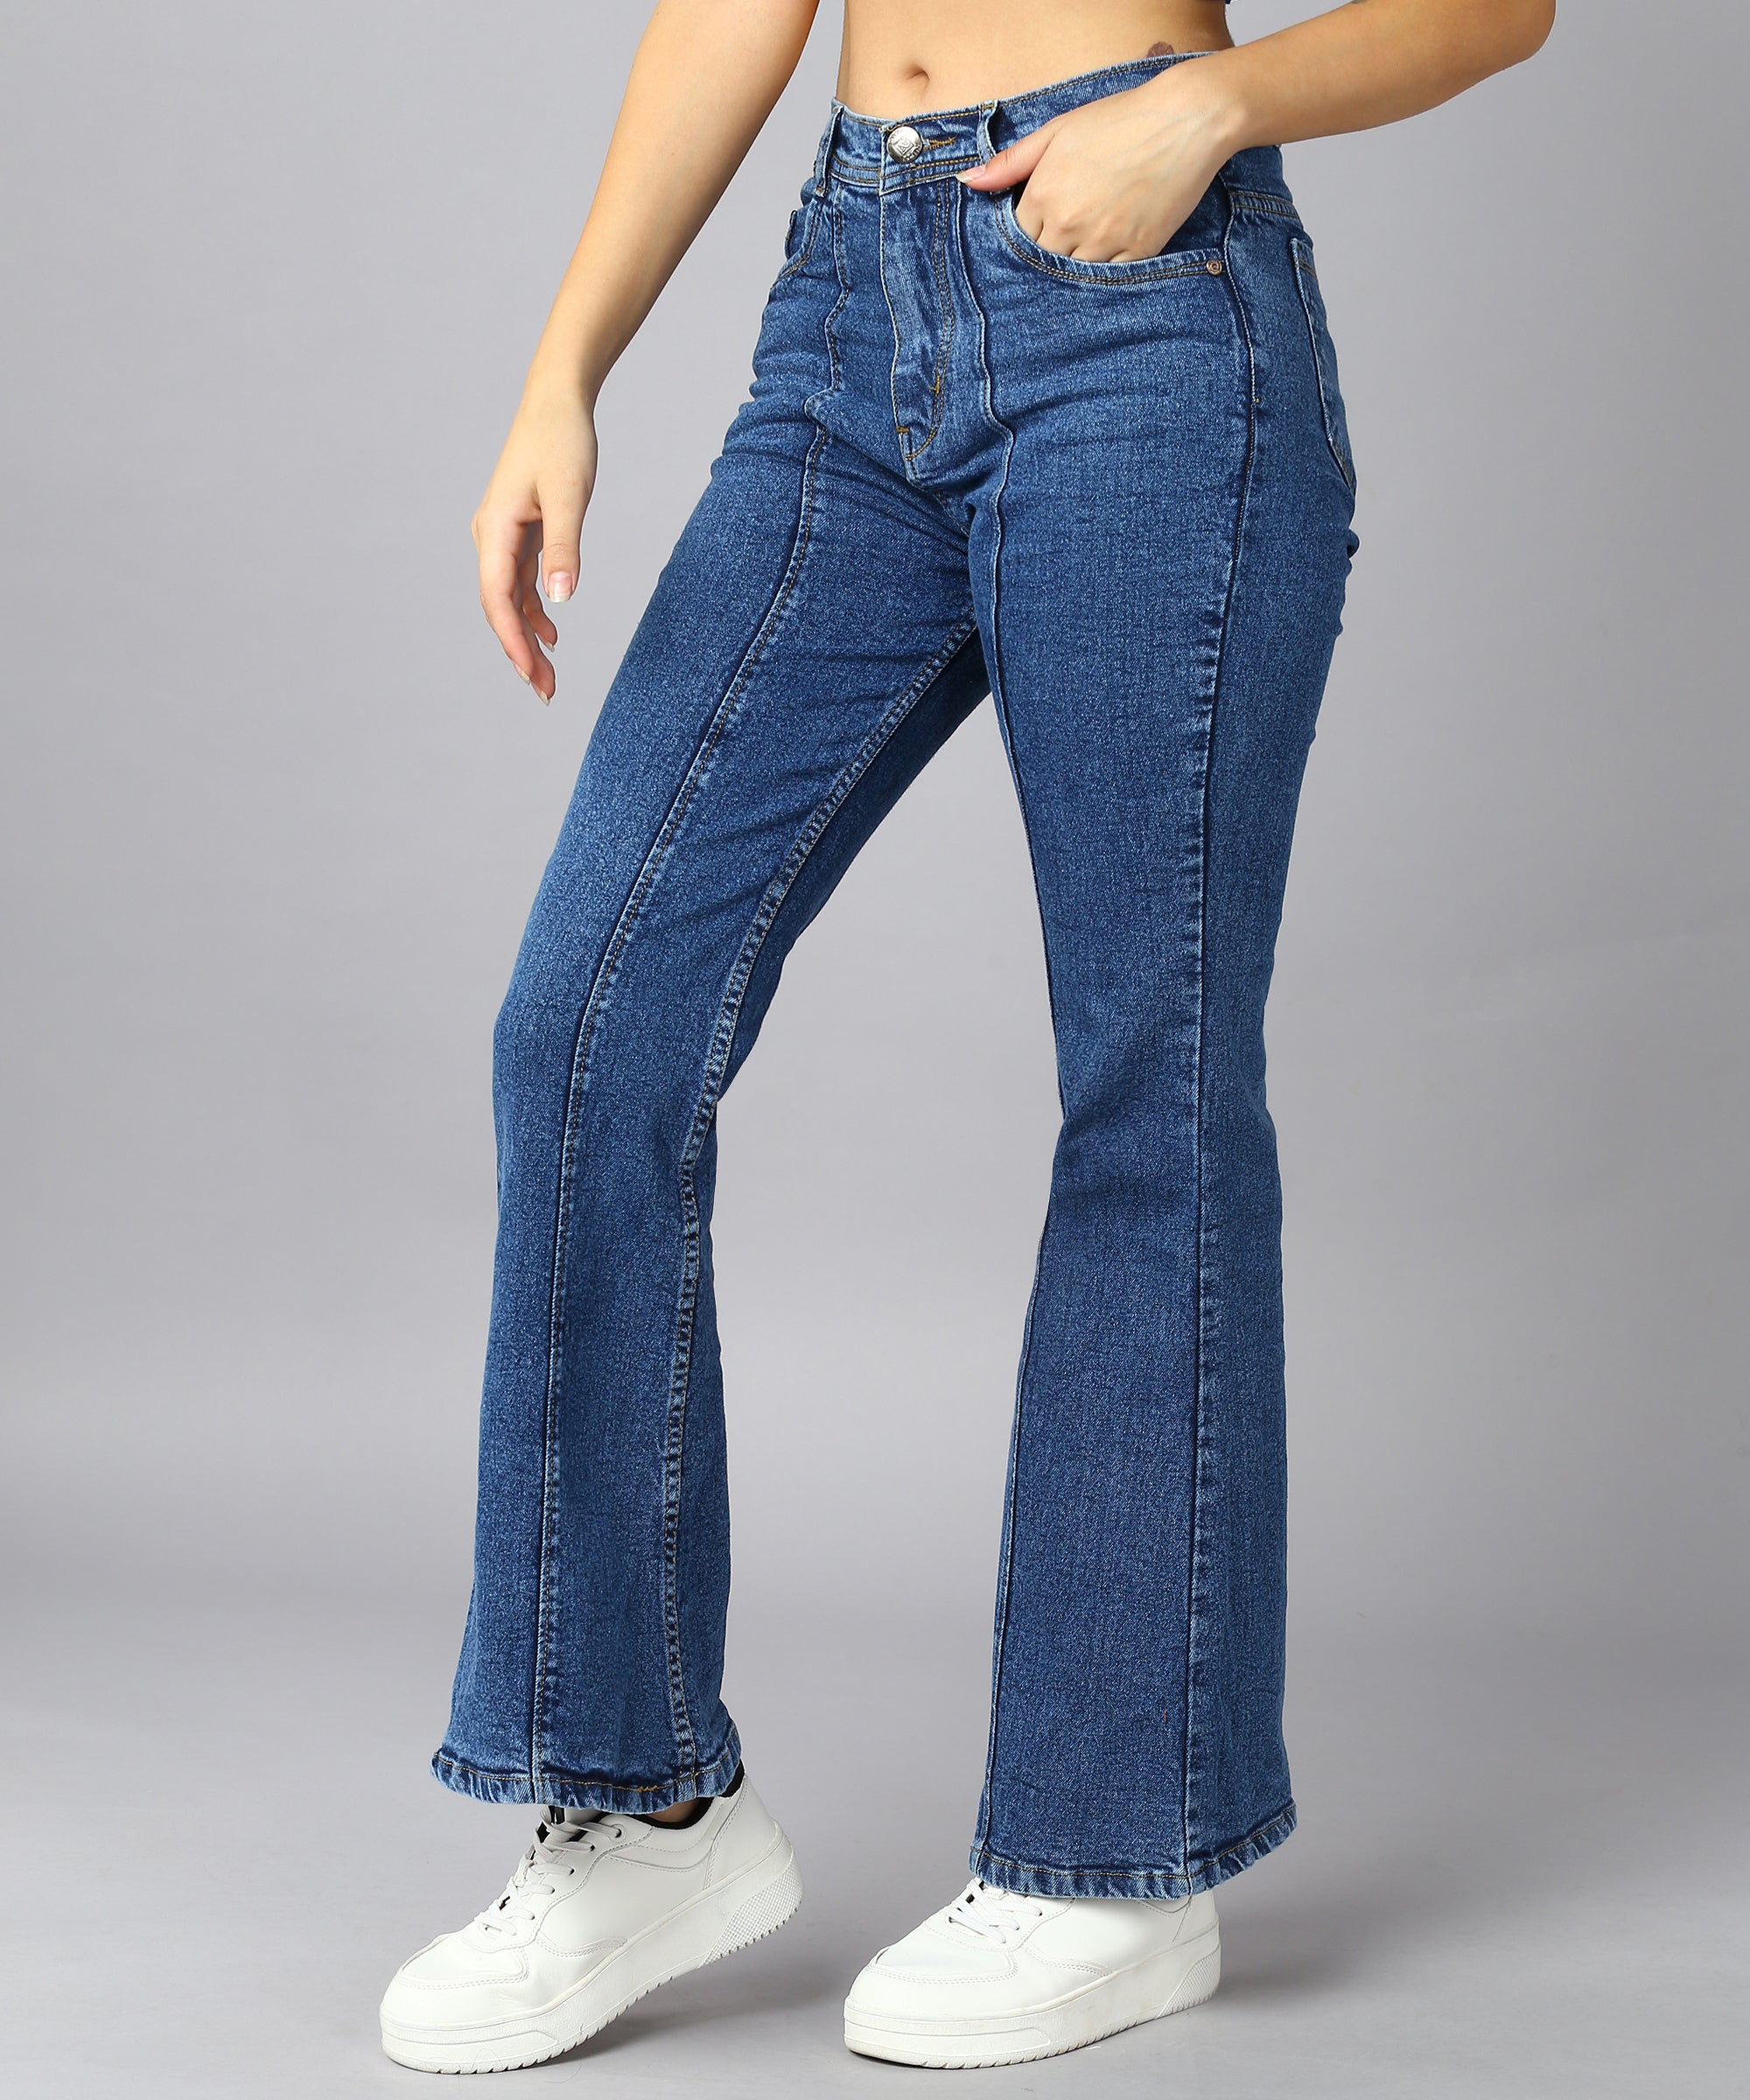 Wrangler high waist button front flare jeans in river blue | ASOS